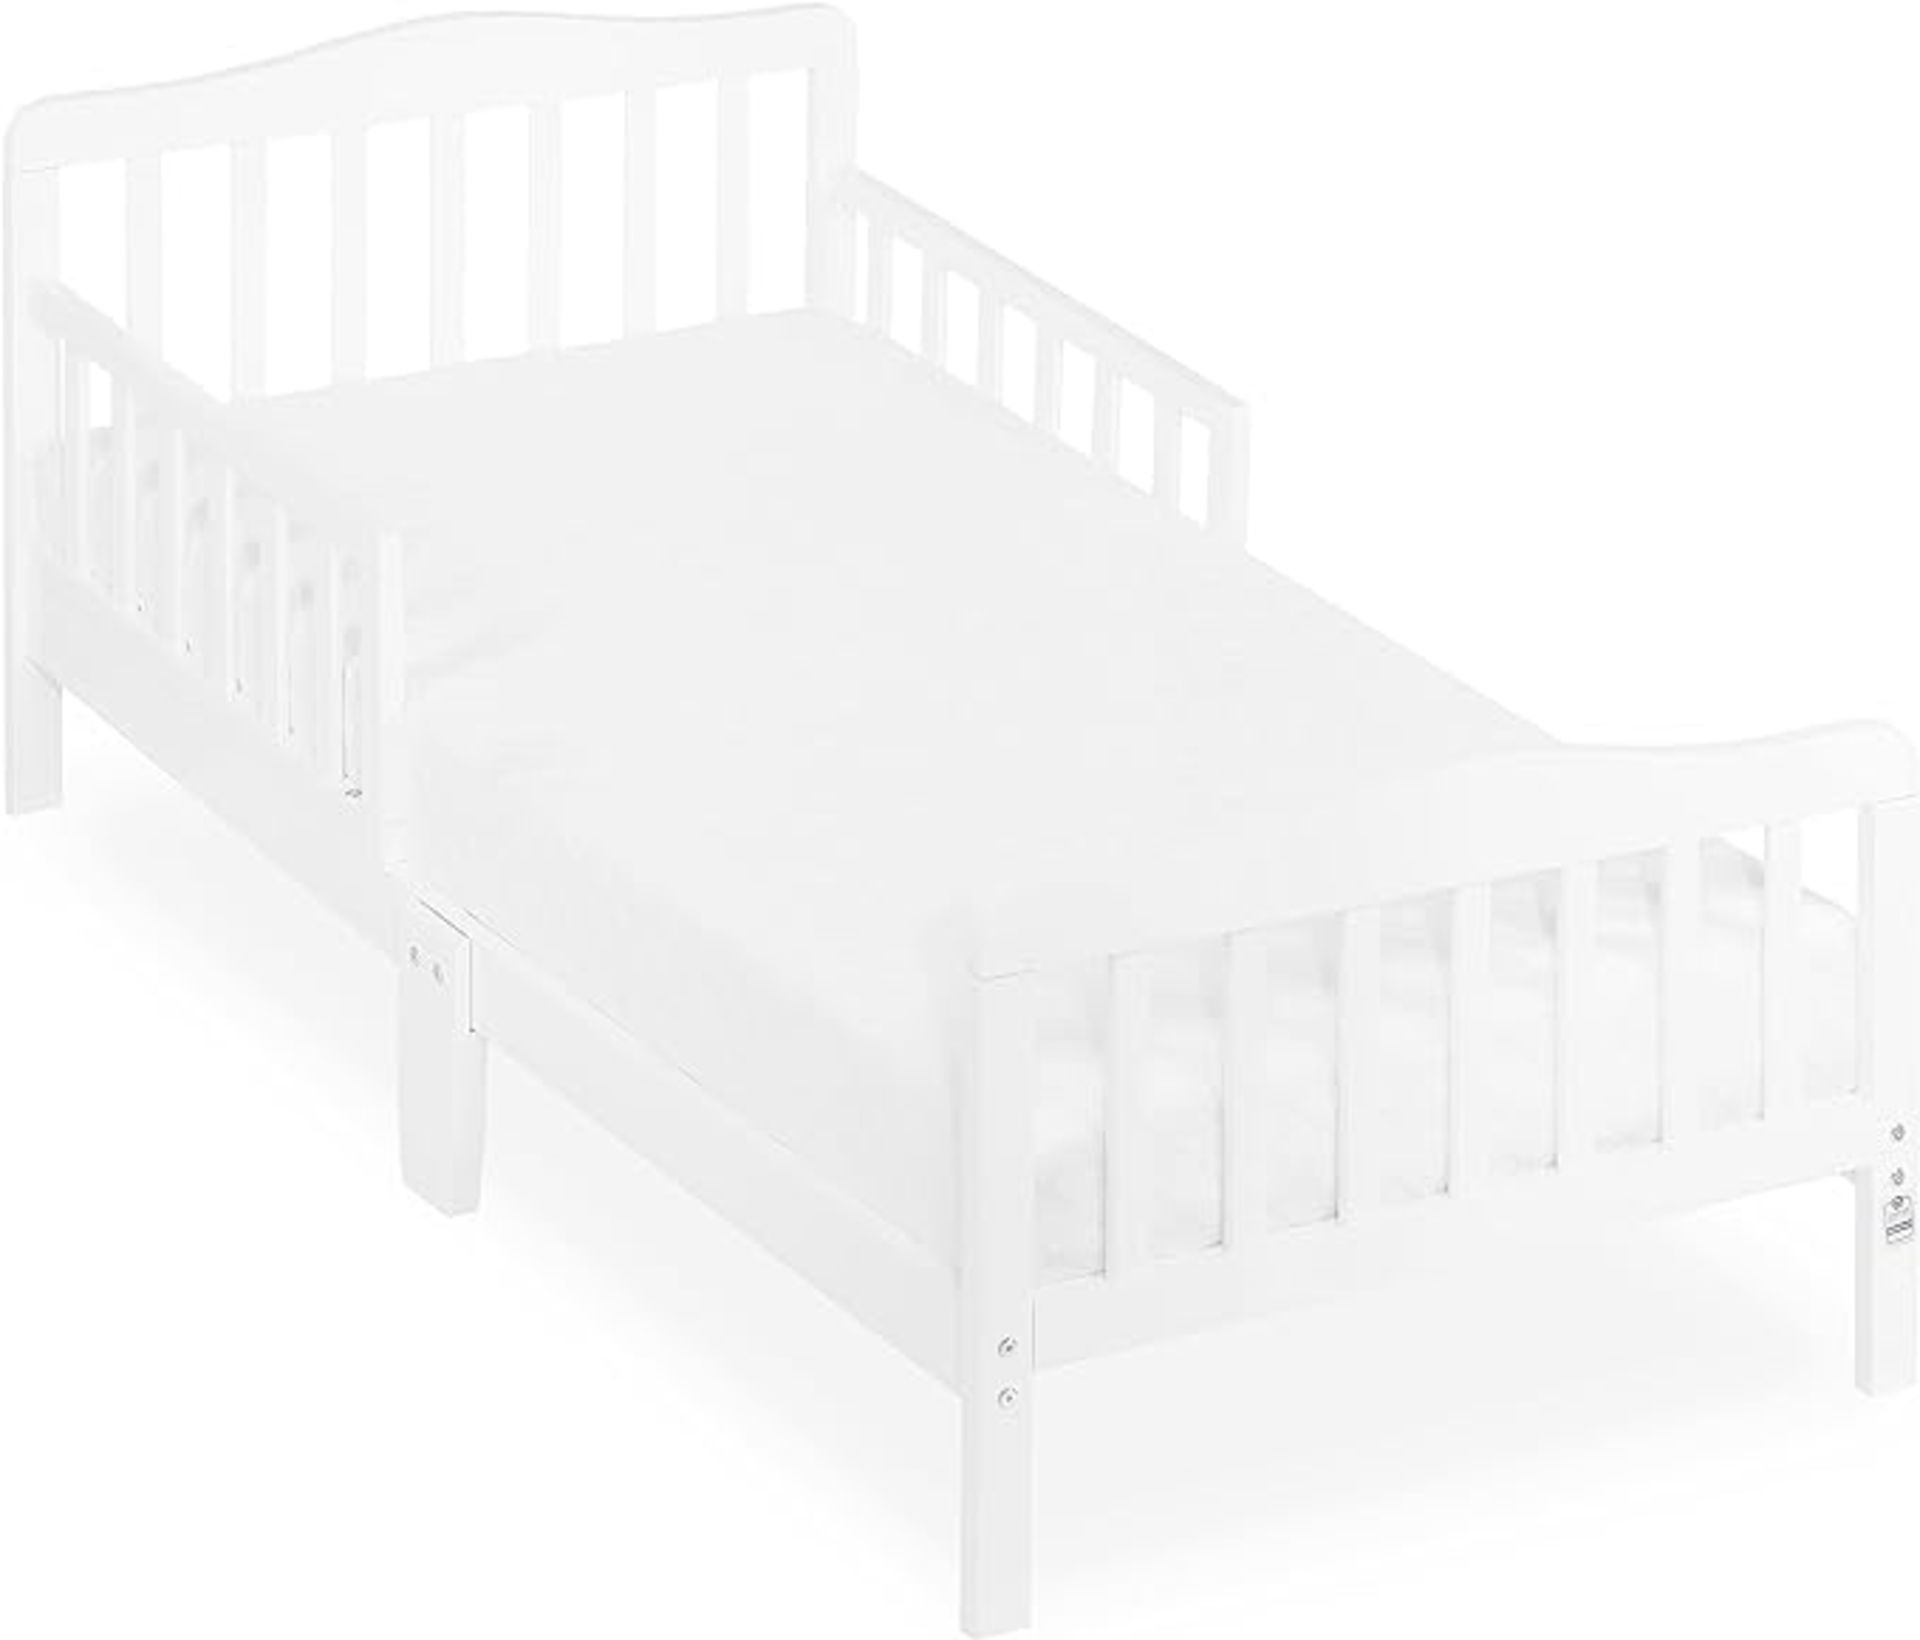 Brand New Dream on Me Classic Toddler Bed. Product dimensionS - 144.8L x 71.1W x 76.2H CM Comes with - Image 2 of 4